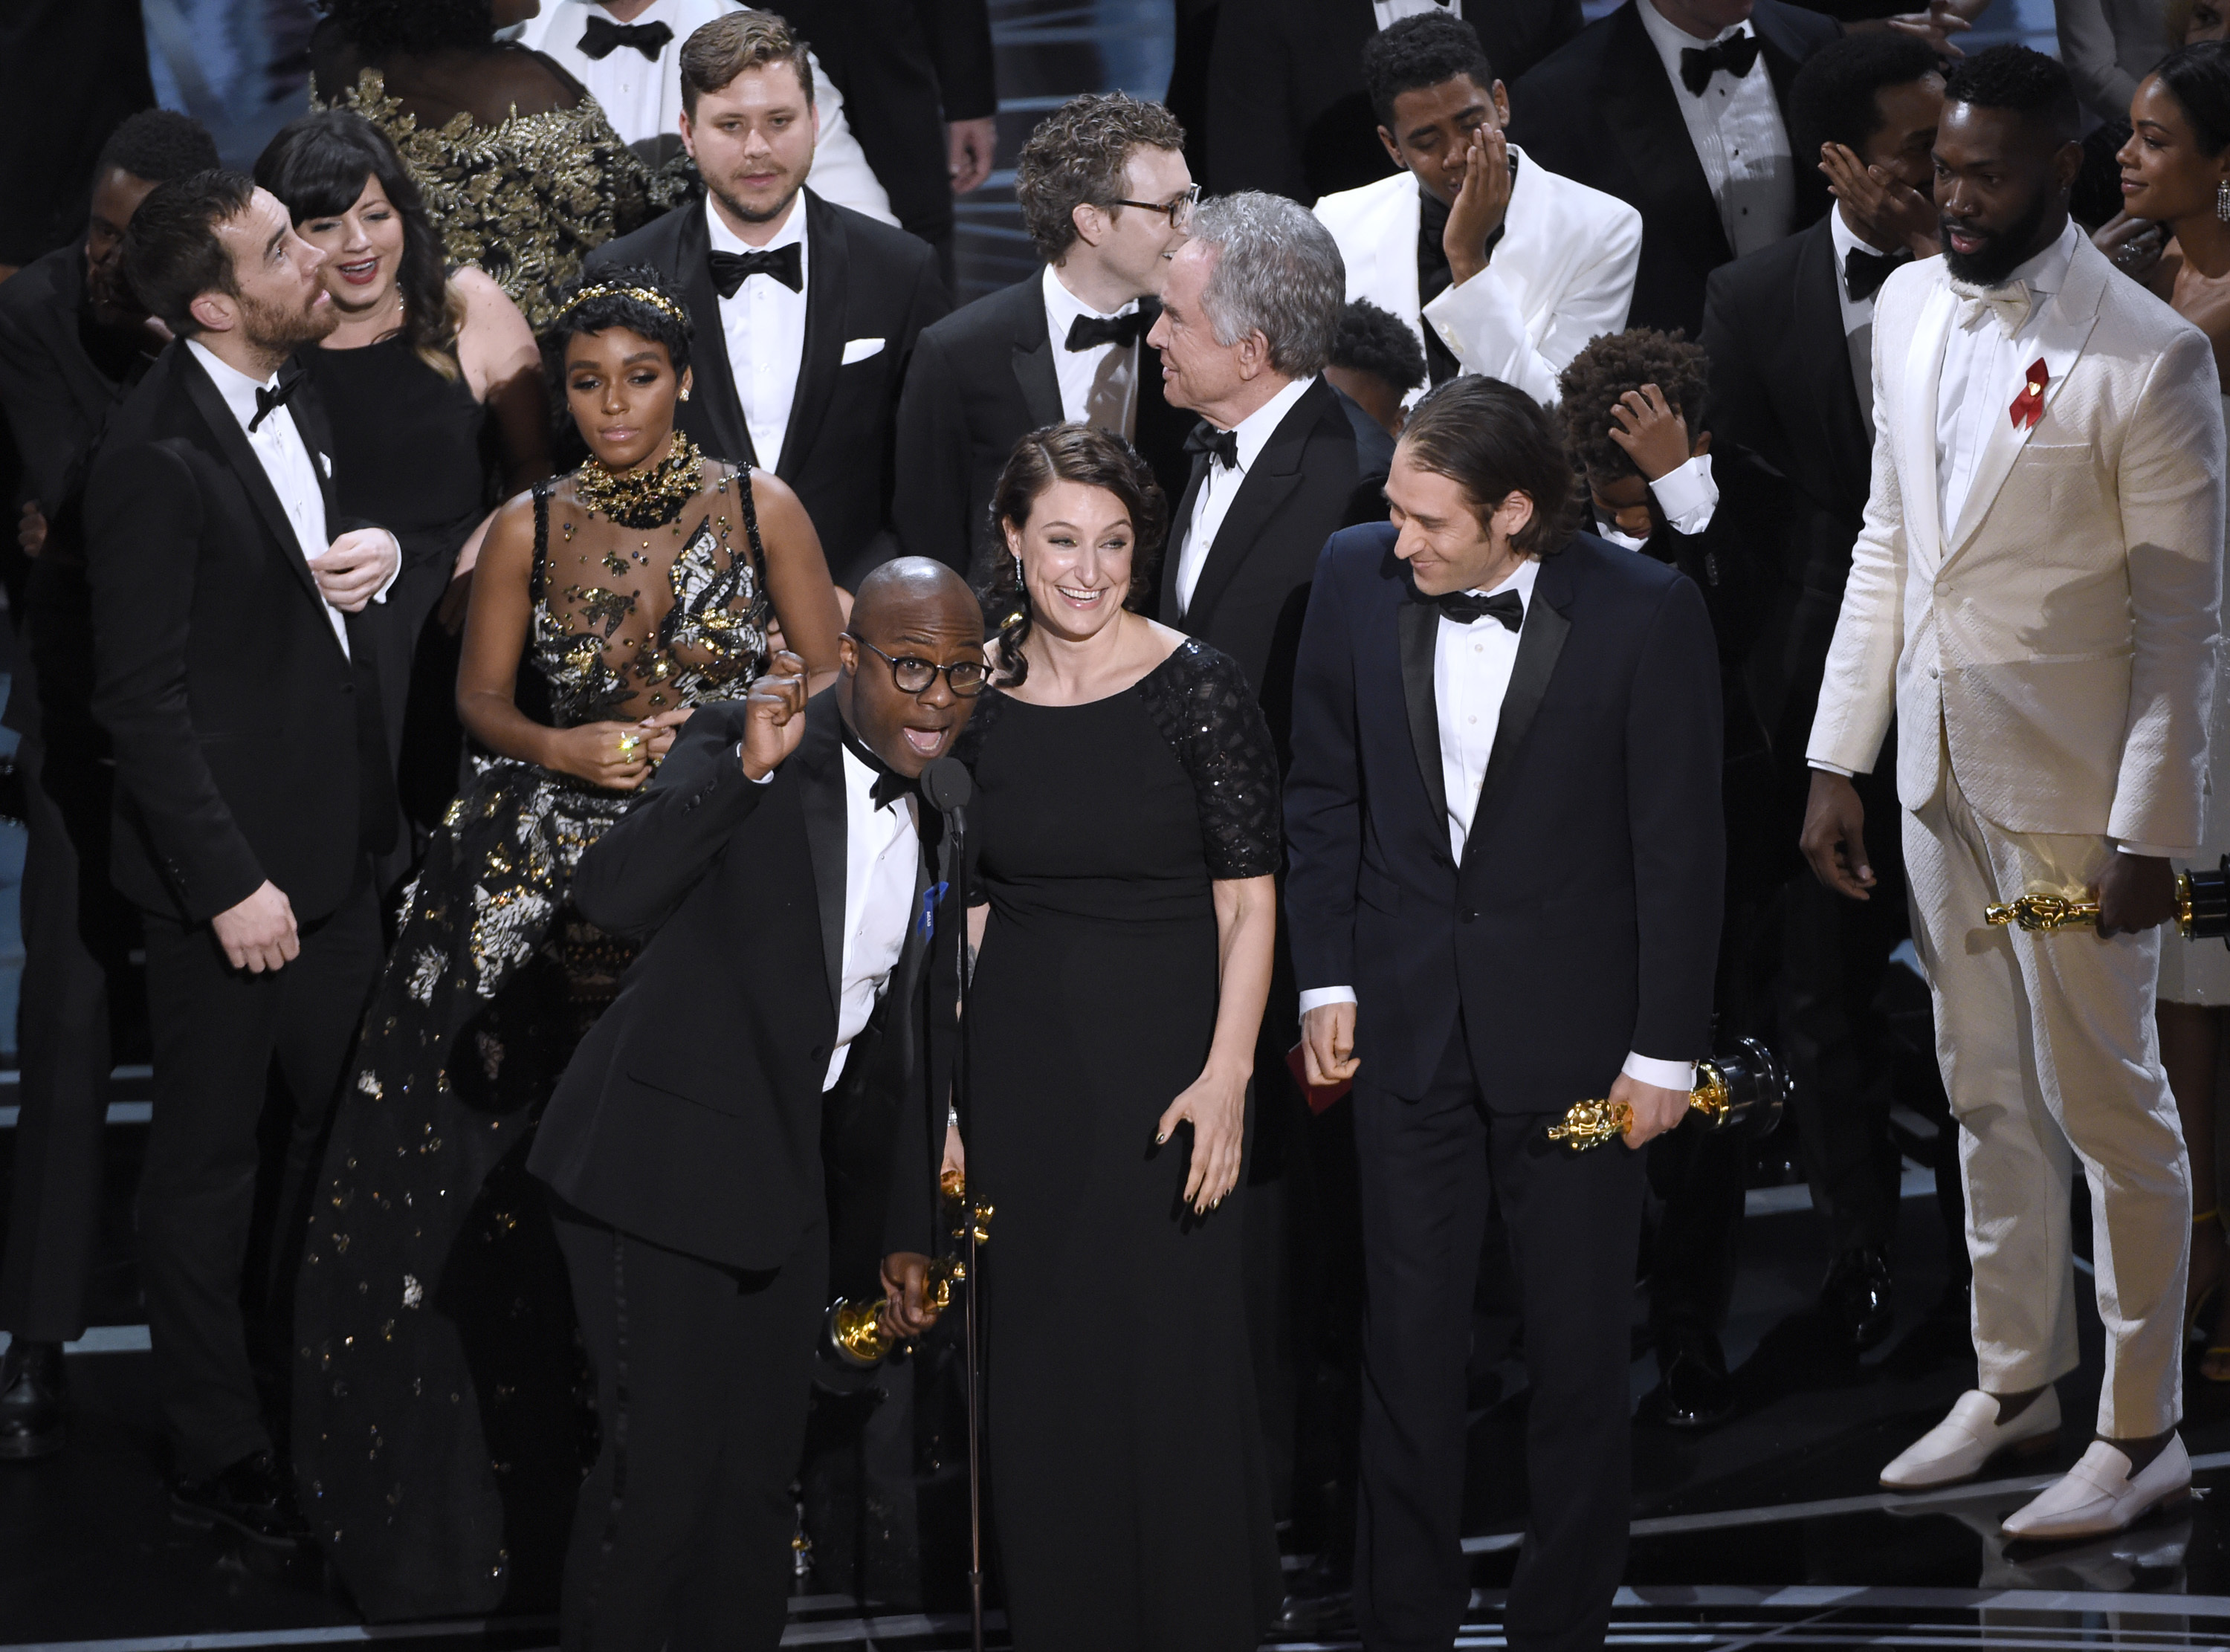 Barry Jenkins, foreground left, and the cast accept the award for best picture for "Moonlight" at the Oscars on Sunday, Feb. 26, 2017, at the Dolby Theatre in Los Angeles.